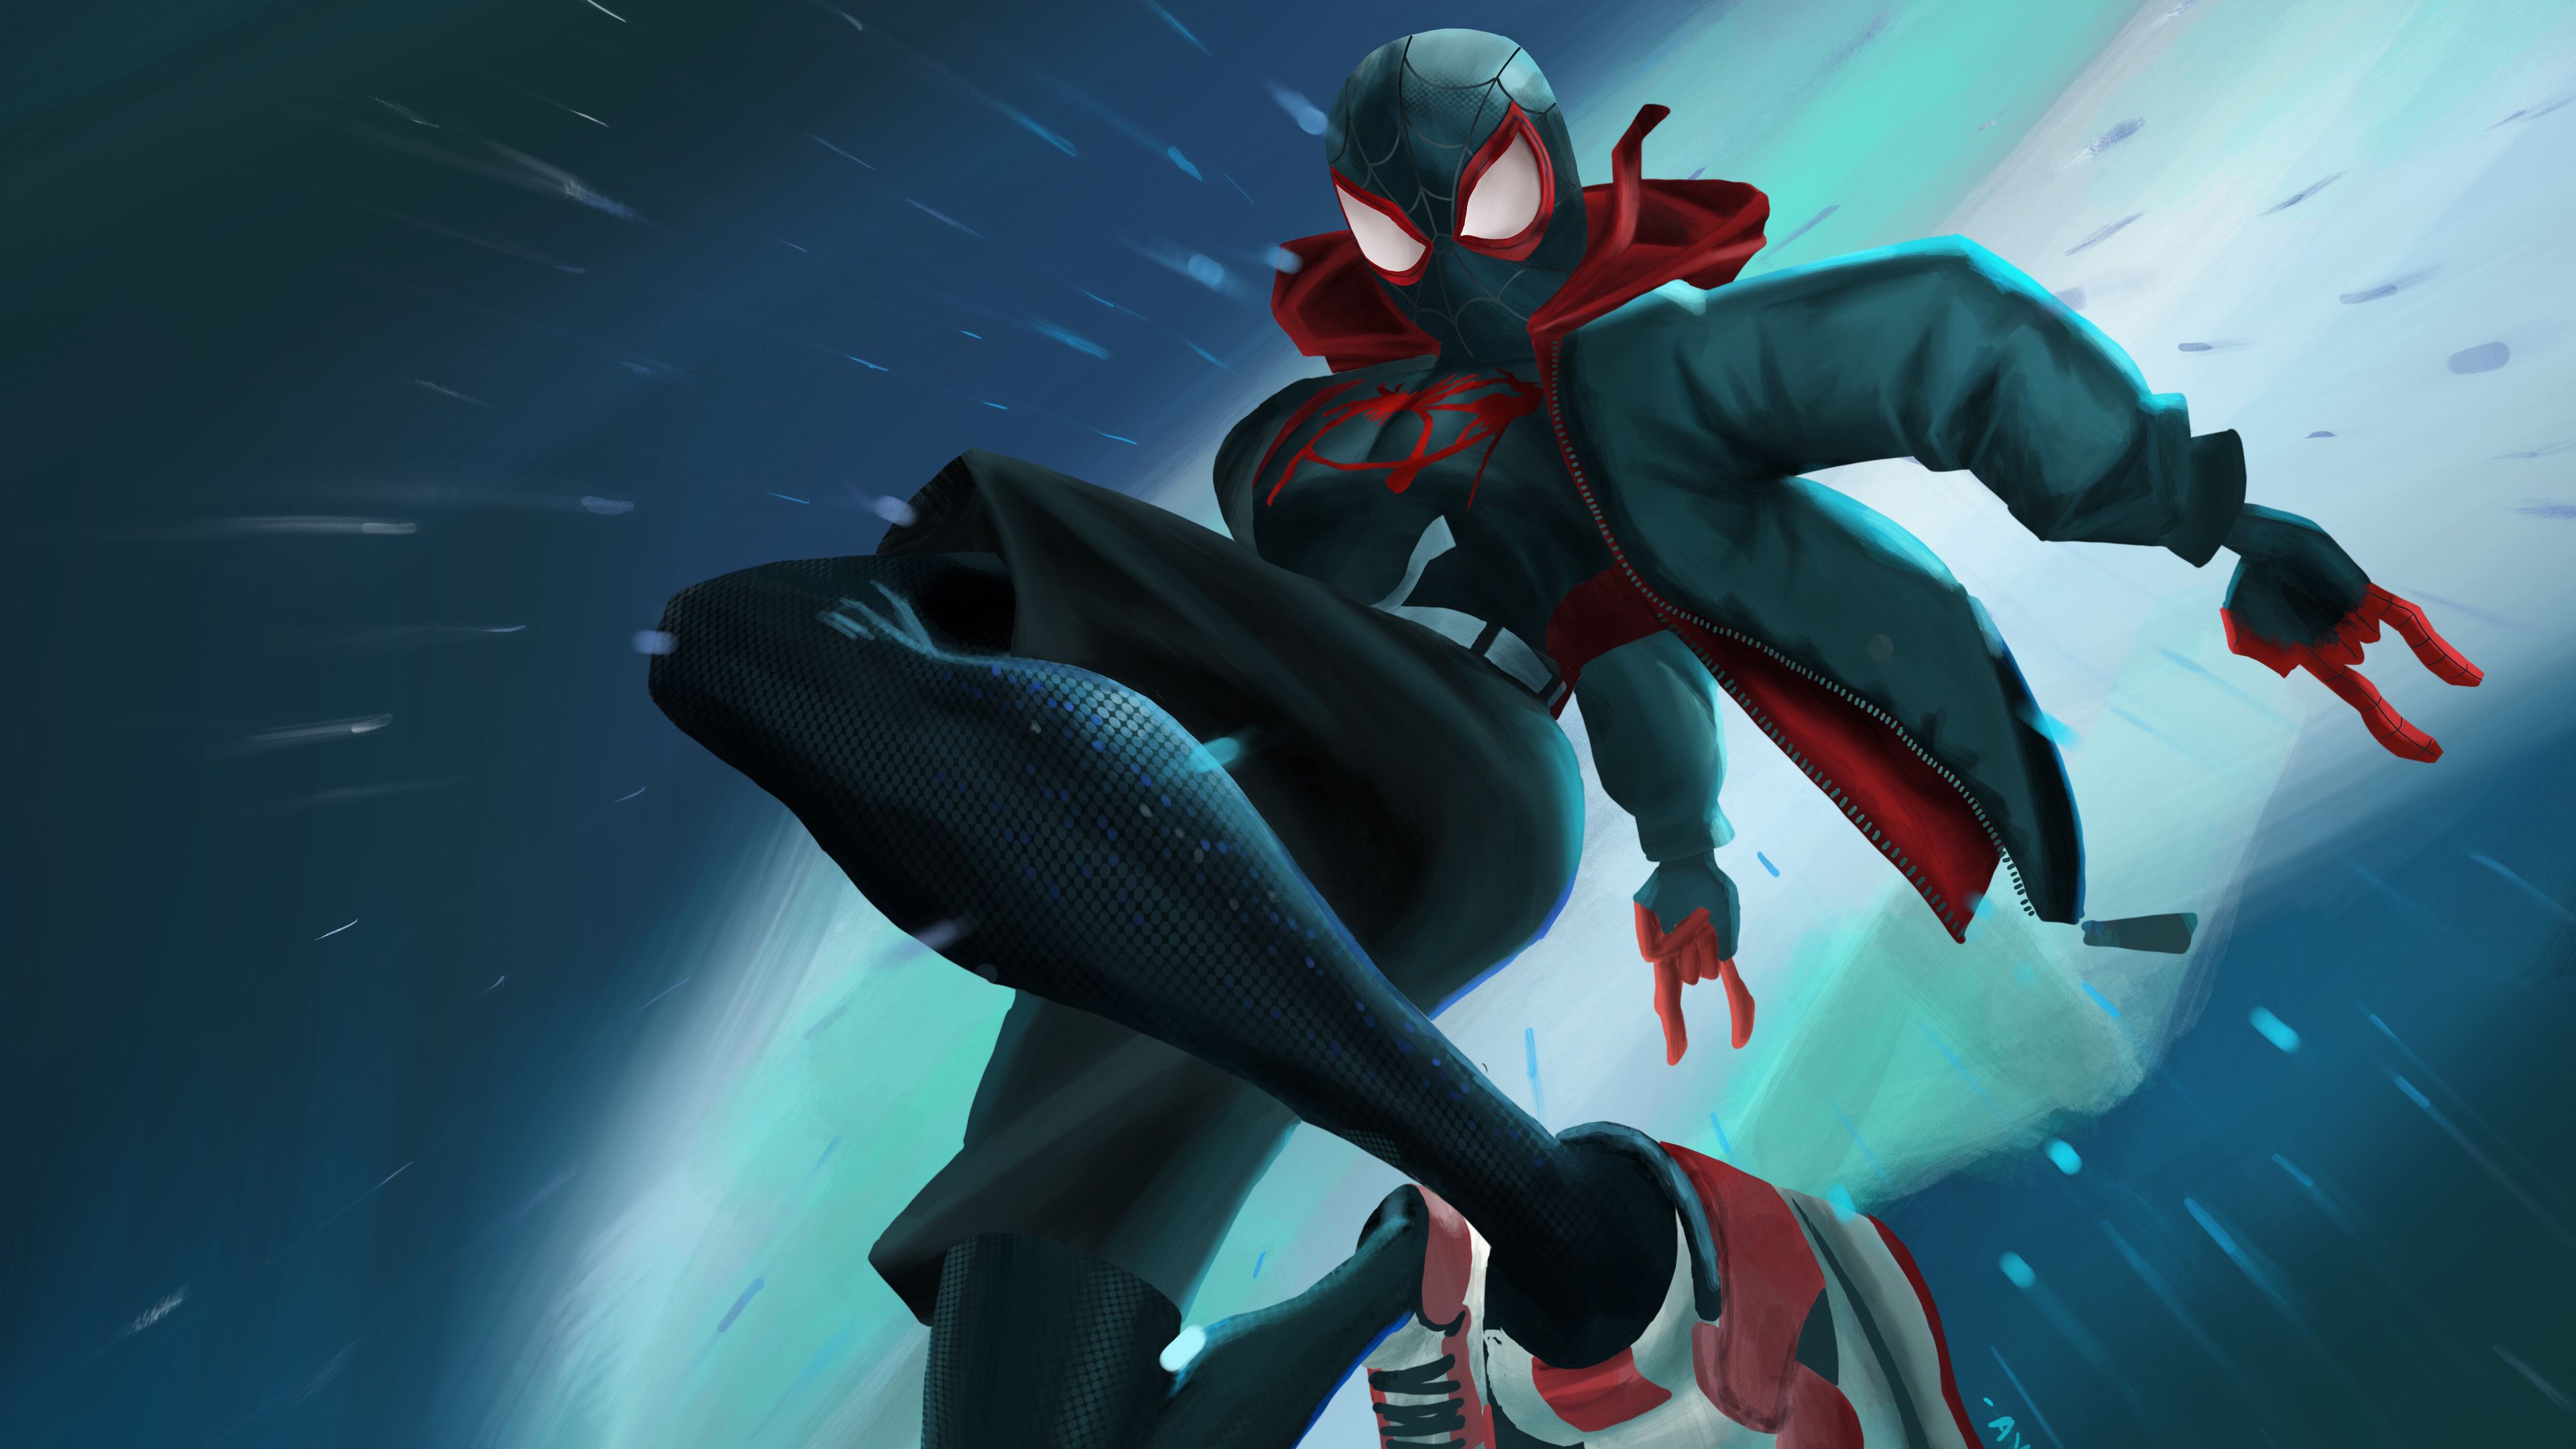 Wallpaper 4k Miles Morales Into The Spider Verse 4k 4k Wallpaper, Artist Wallpaper, Artwork Wallpaper, Wallpaper, Digital Art Wallpaper, Hd Wallpaper, Spiderman Into The Spider Verse Wallpaper, Spiderman Wallpaper, Superheroes Wallpaper